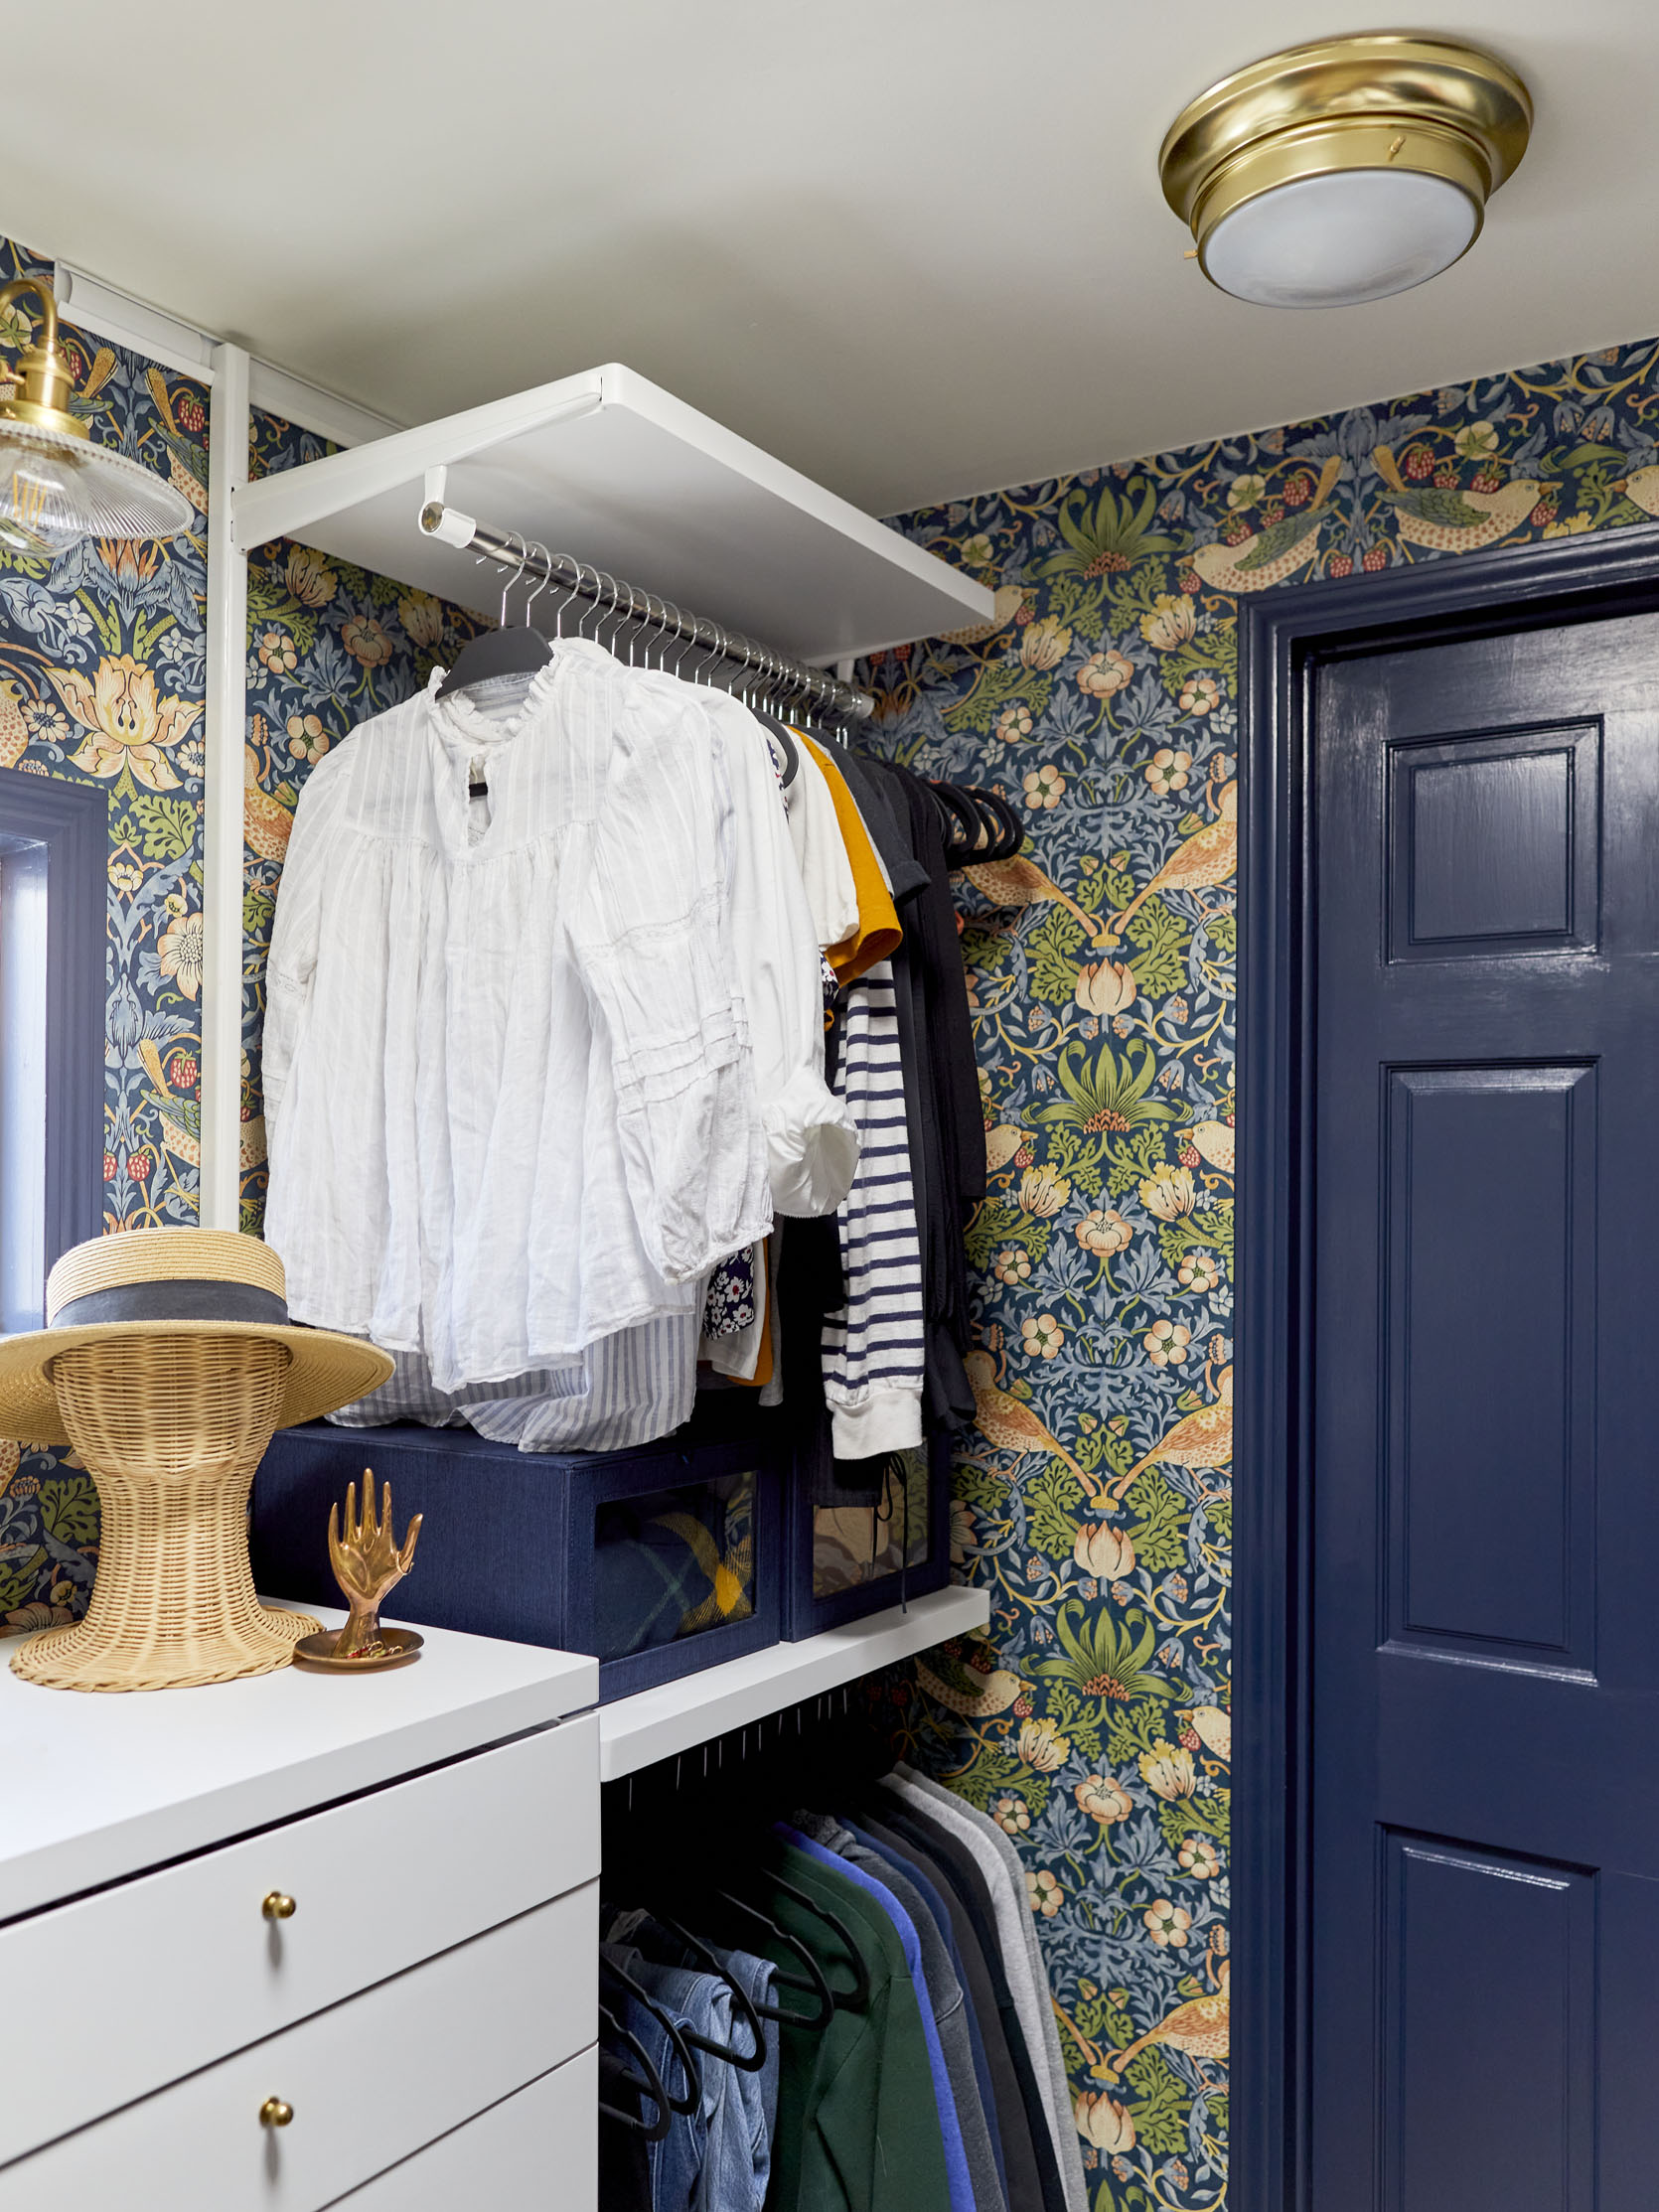 Sara'S Primary Closet Reveal - The Bold Design Moment She'S Been Craving